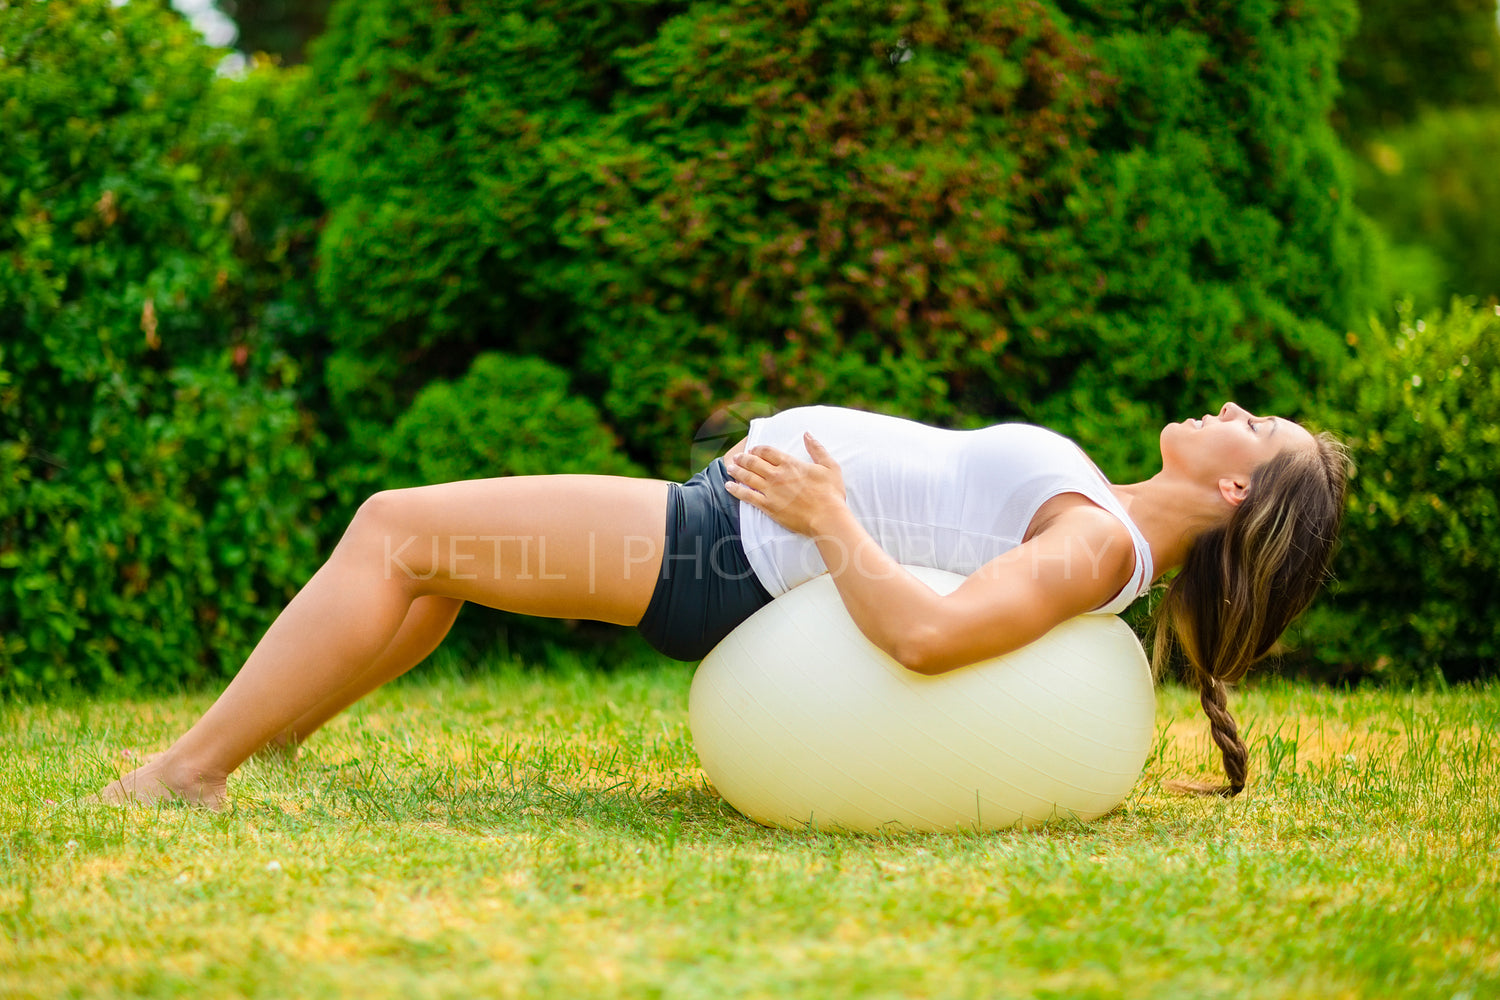 Pregnant Woman Stretching Back On Yoga Ball In Park